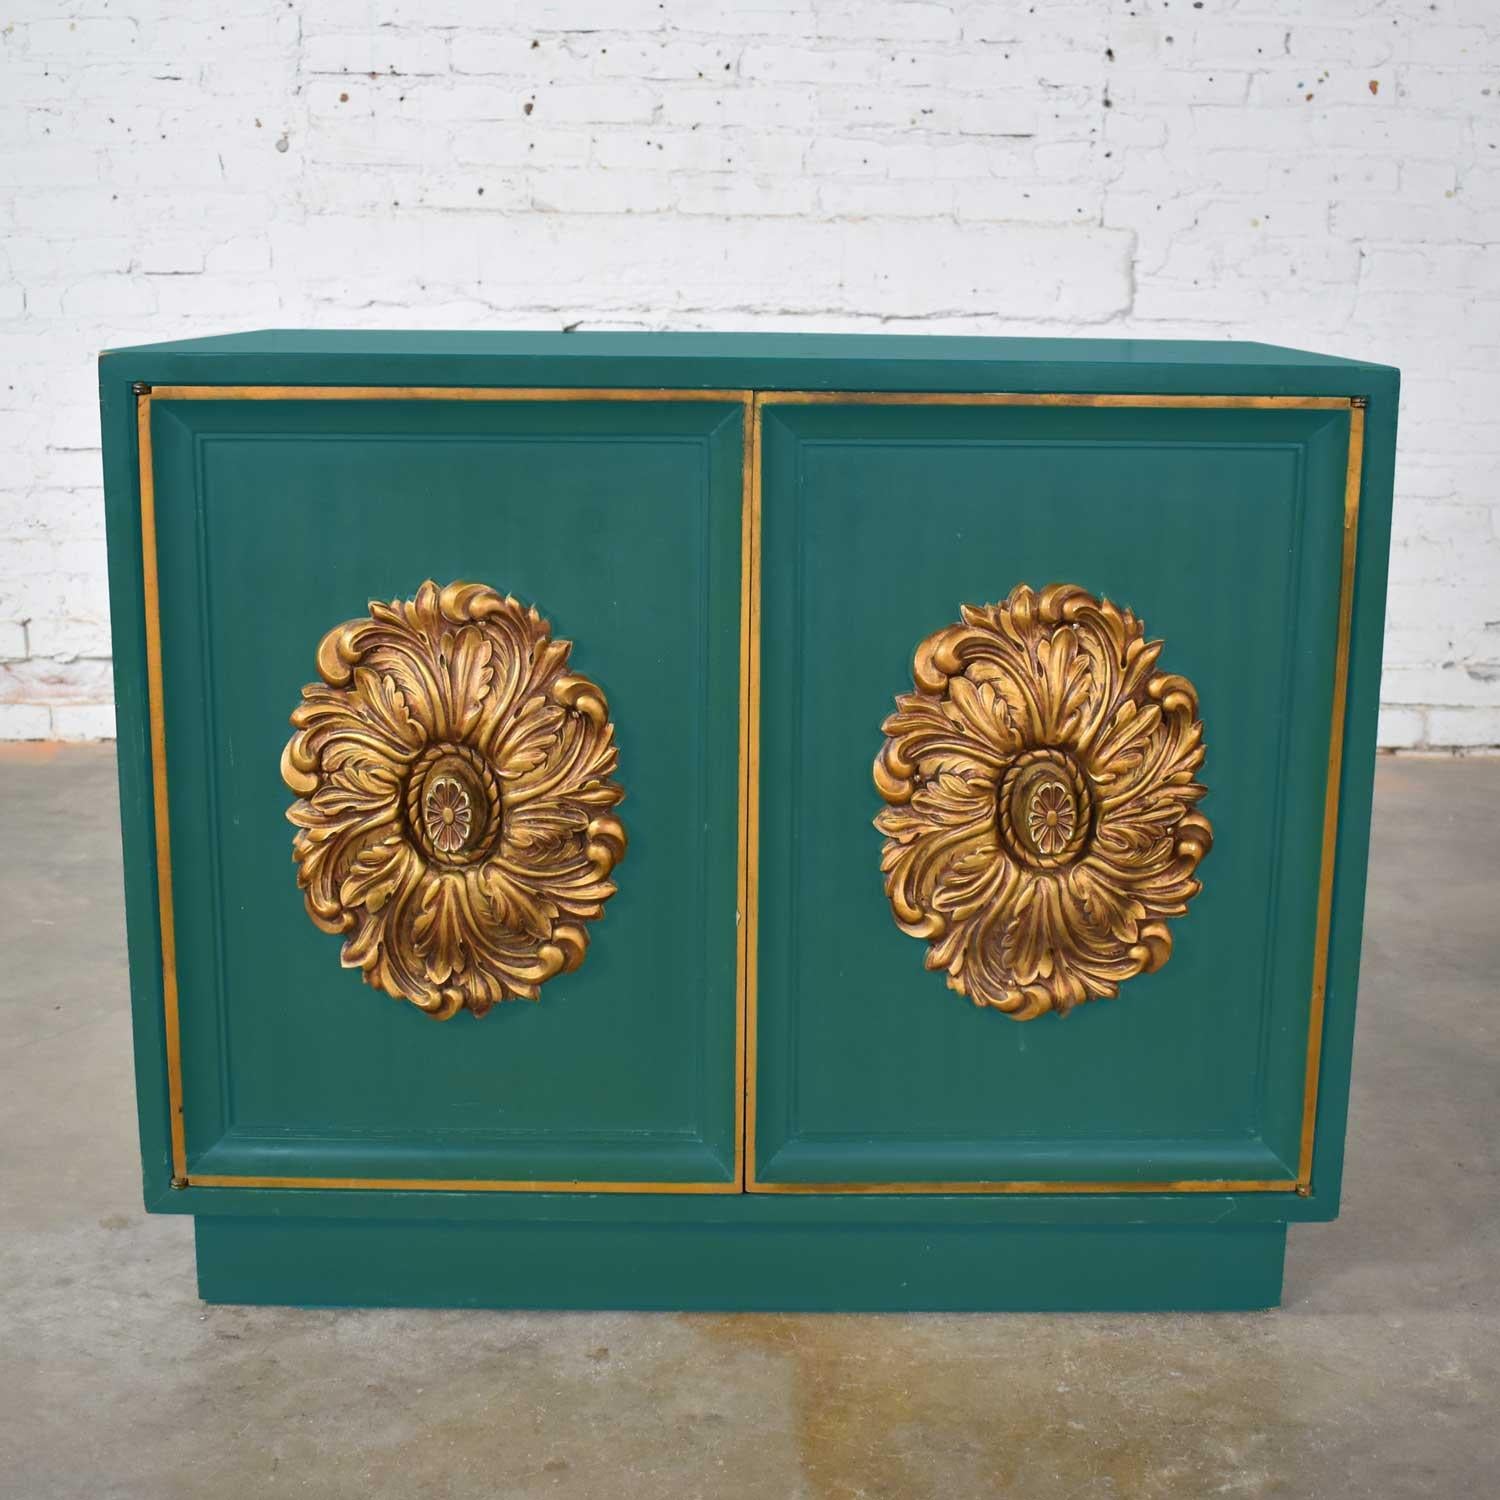 Midcentury Hollywood Regency Lane Small 2 Door Credenza Style J Mont or D Draper For Sale 8